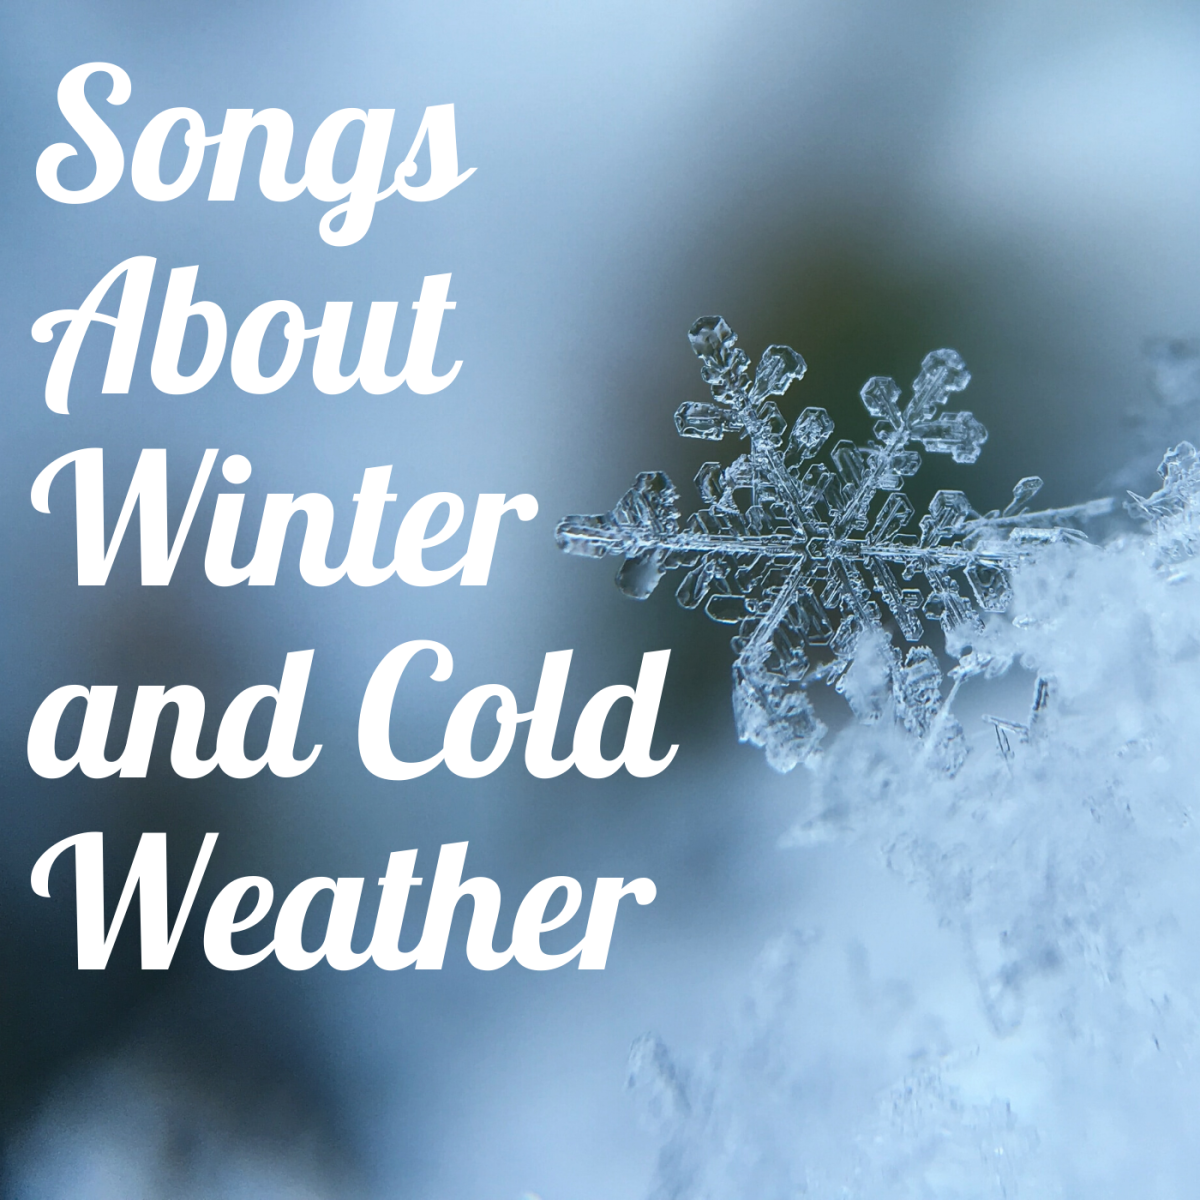 Grab a sweater and celebrate winter and cold weather. Create a playlist of pop, rock, country, & R&B songs about the wintry season.